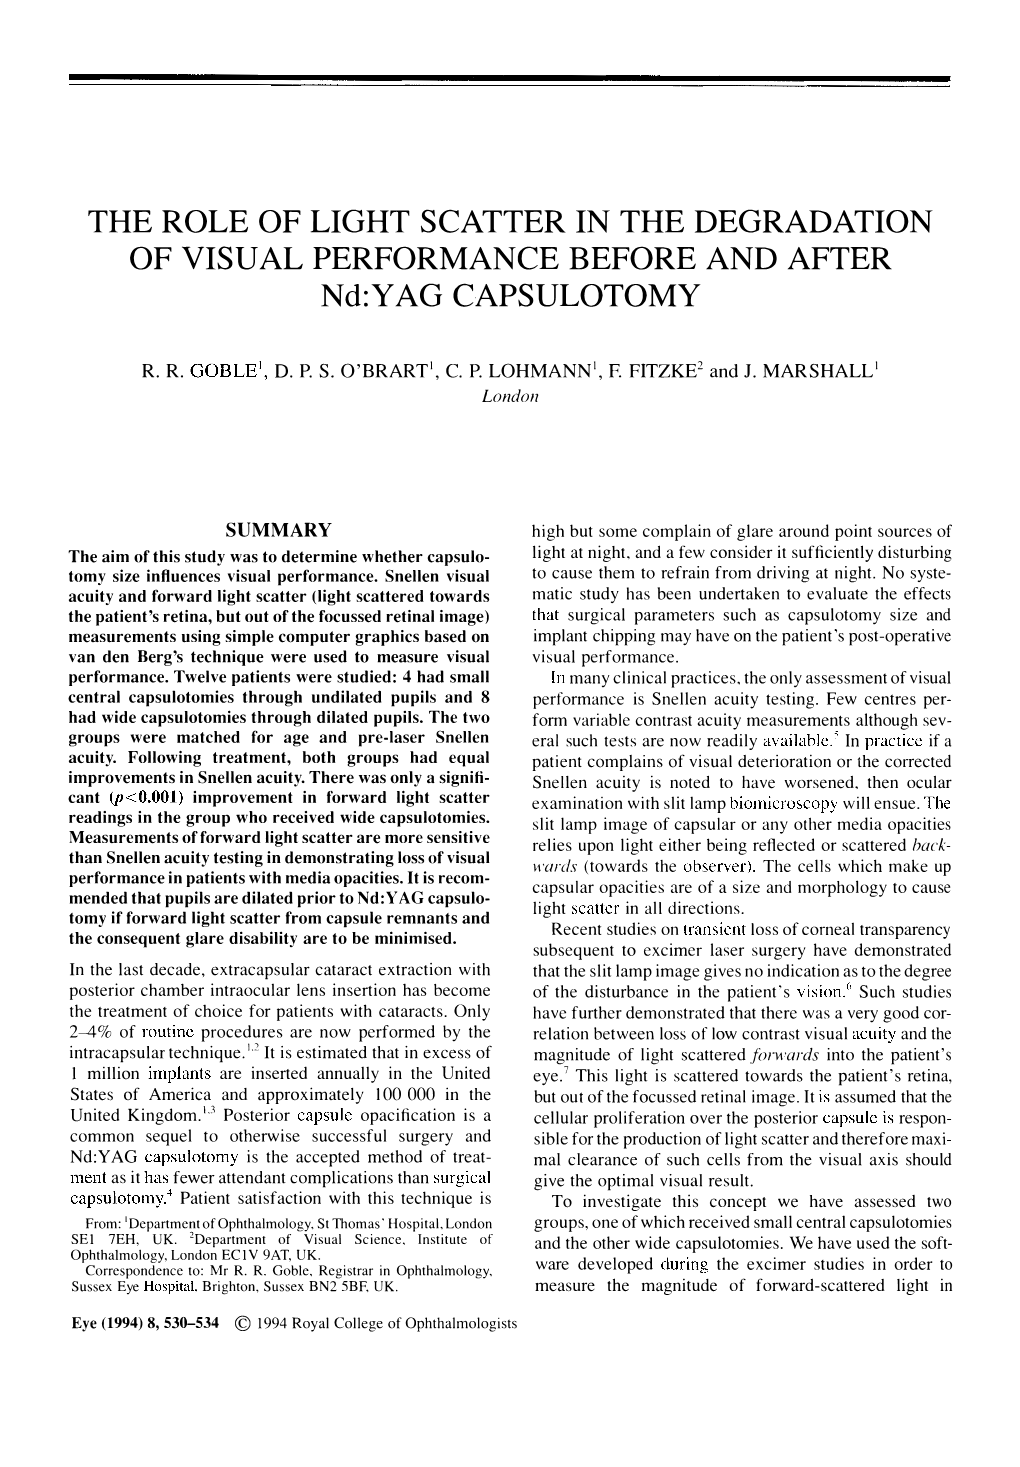 THE ROLE of LIGHT SCATTER in the DEGRADATION of VISUAL PERFORMANCE BEFORE and AFTER Nd:YAG CAPSULOTOMY